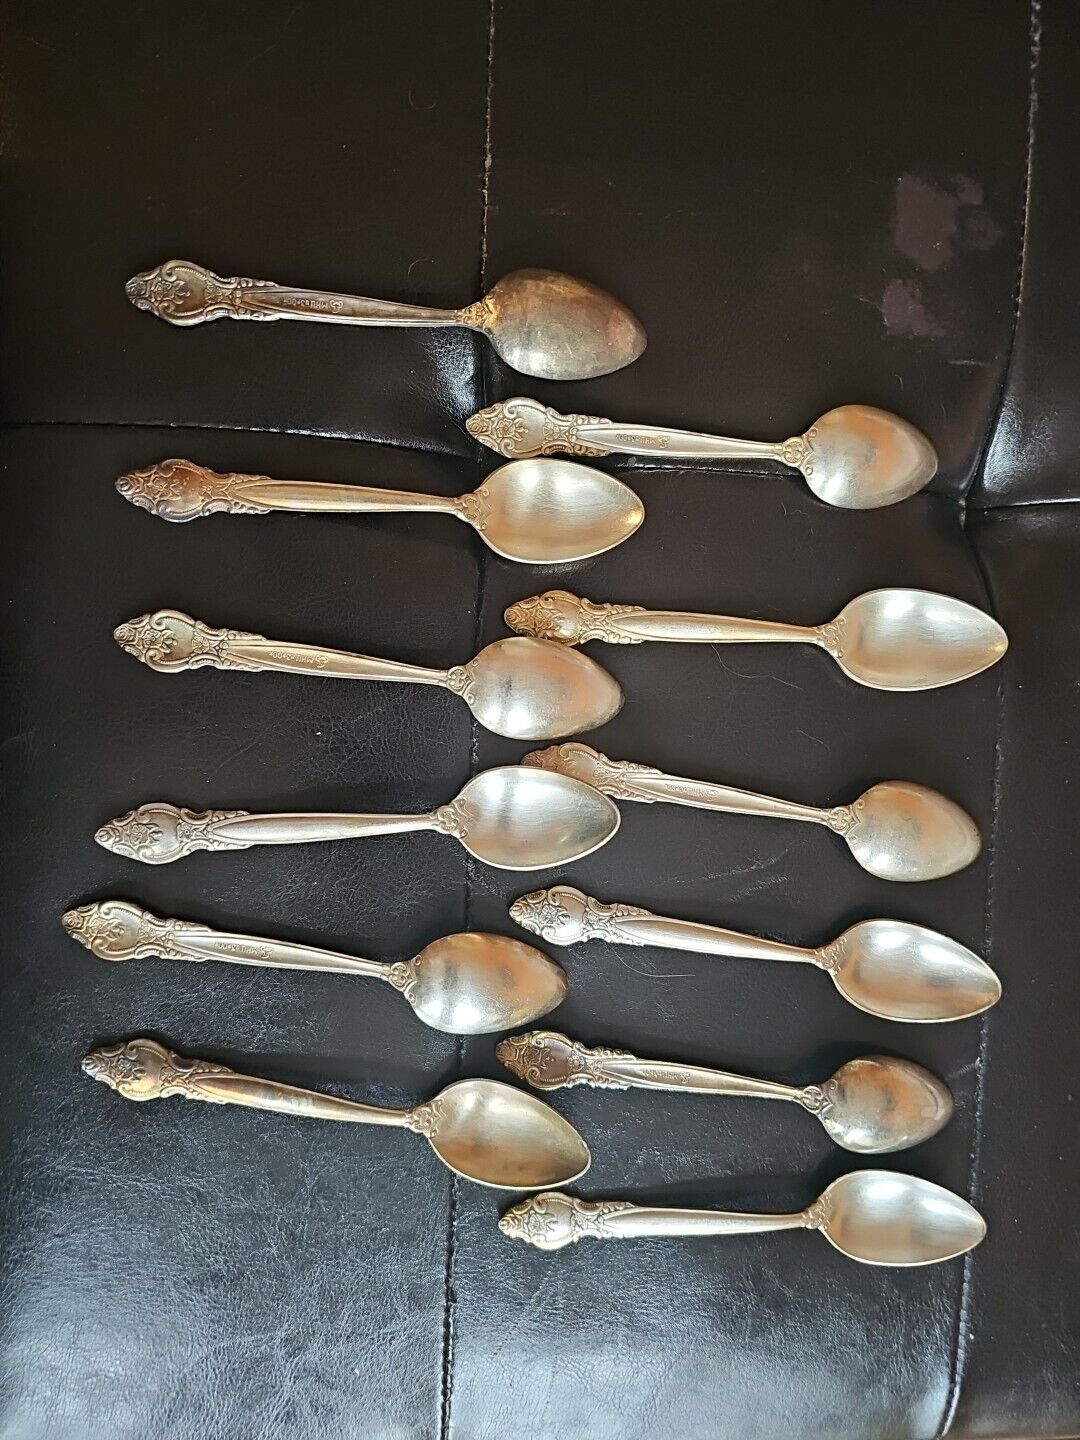 Vintage Silver Plated Made in Russia Spoons - 12pcs